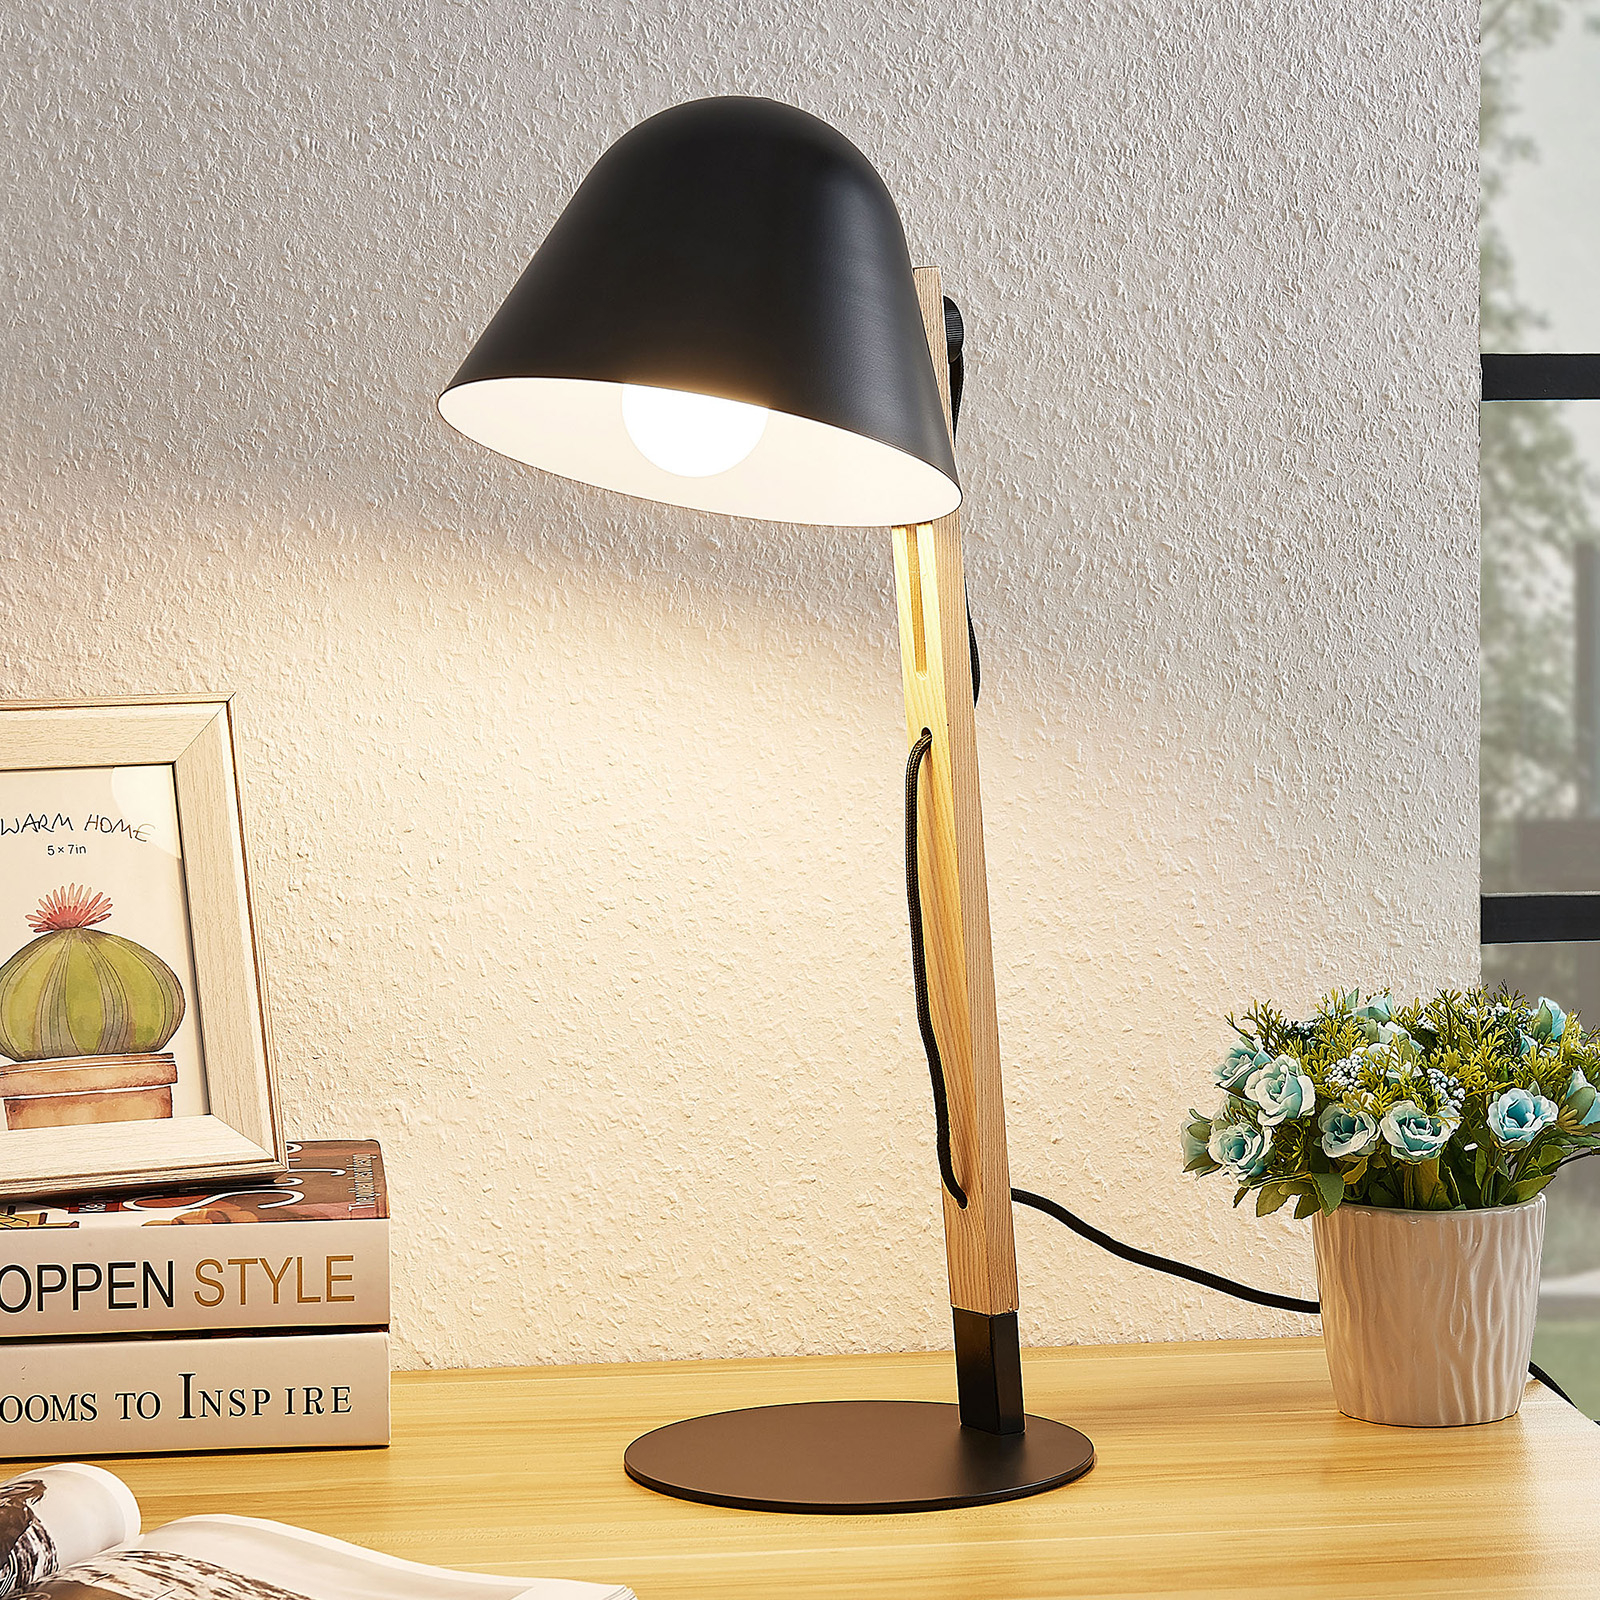 Lindby Tetja table lamp with a wooden rod, black